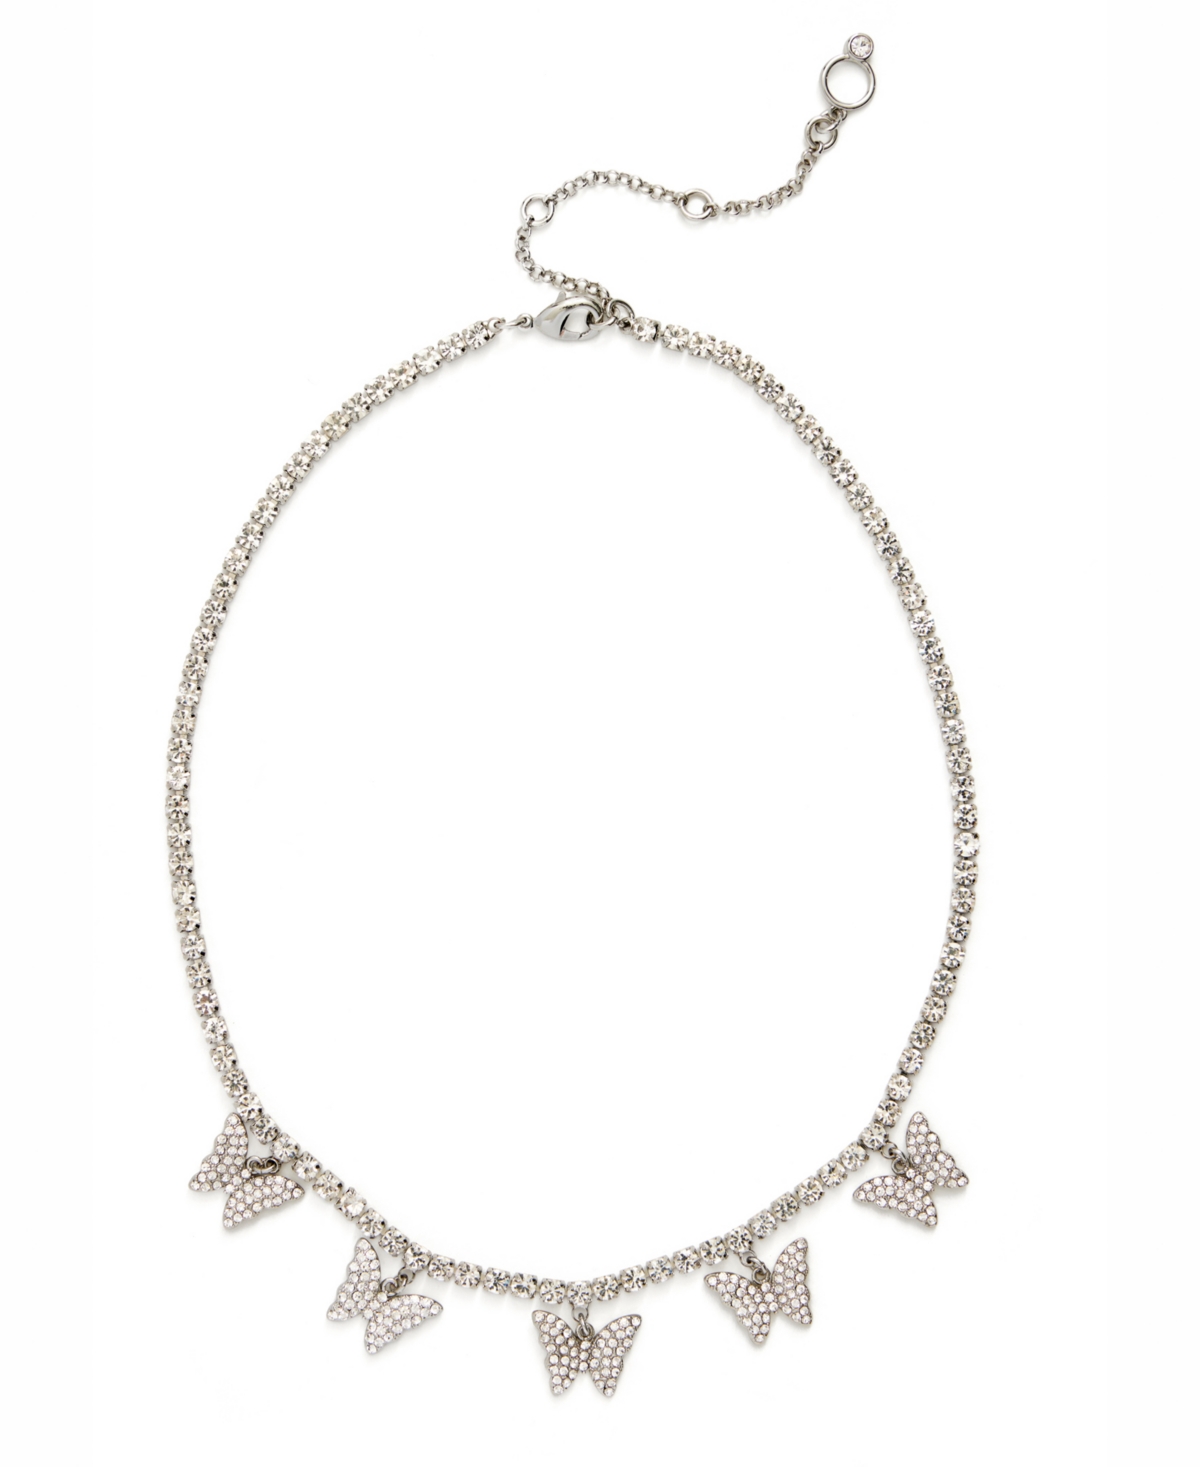 Faux Stone Pave Butterfly Bib Necklace - Crystal, Rhodium